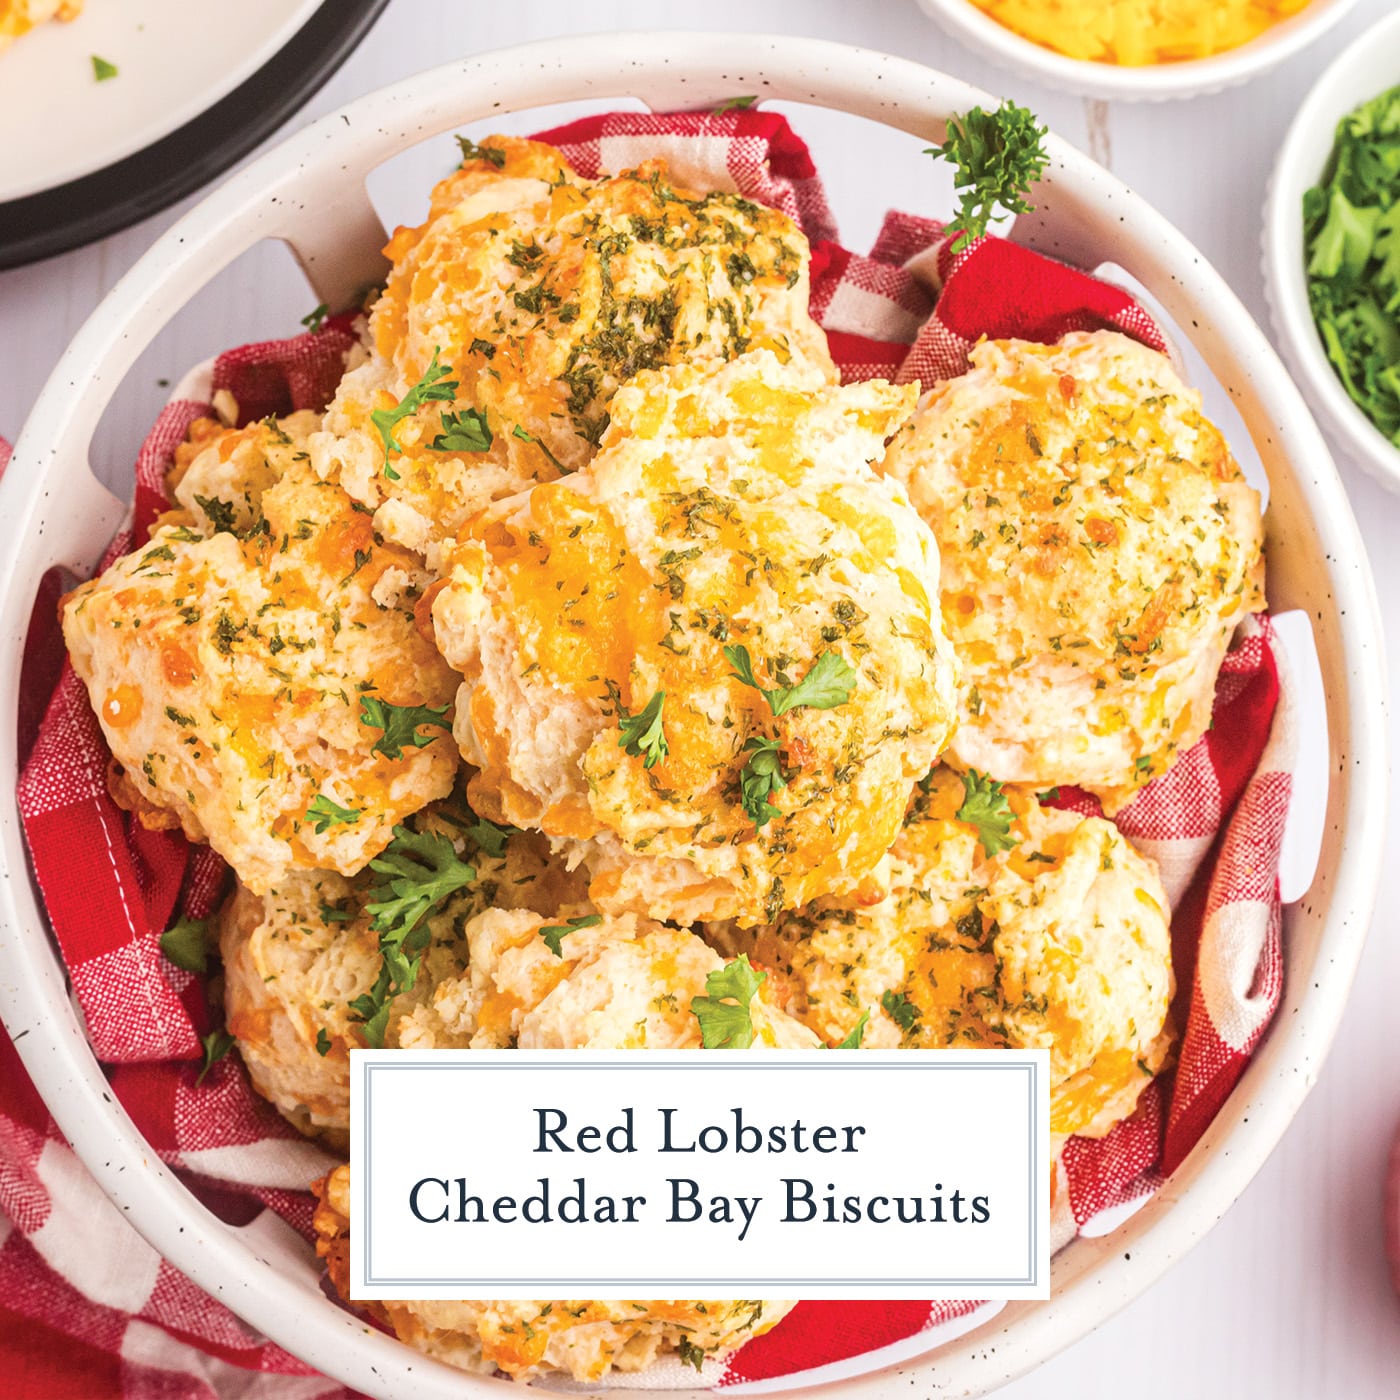 https://www.savoryexperiments.com/wp-content/uploads/2023/08/Red-Lobster-Cheddar-Bay-Biscuits-FB.jpg